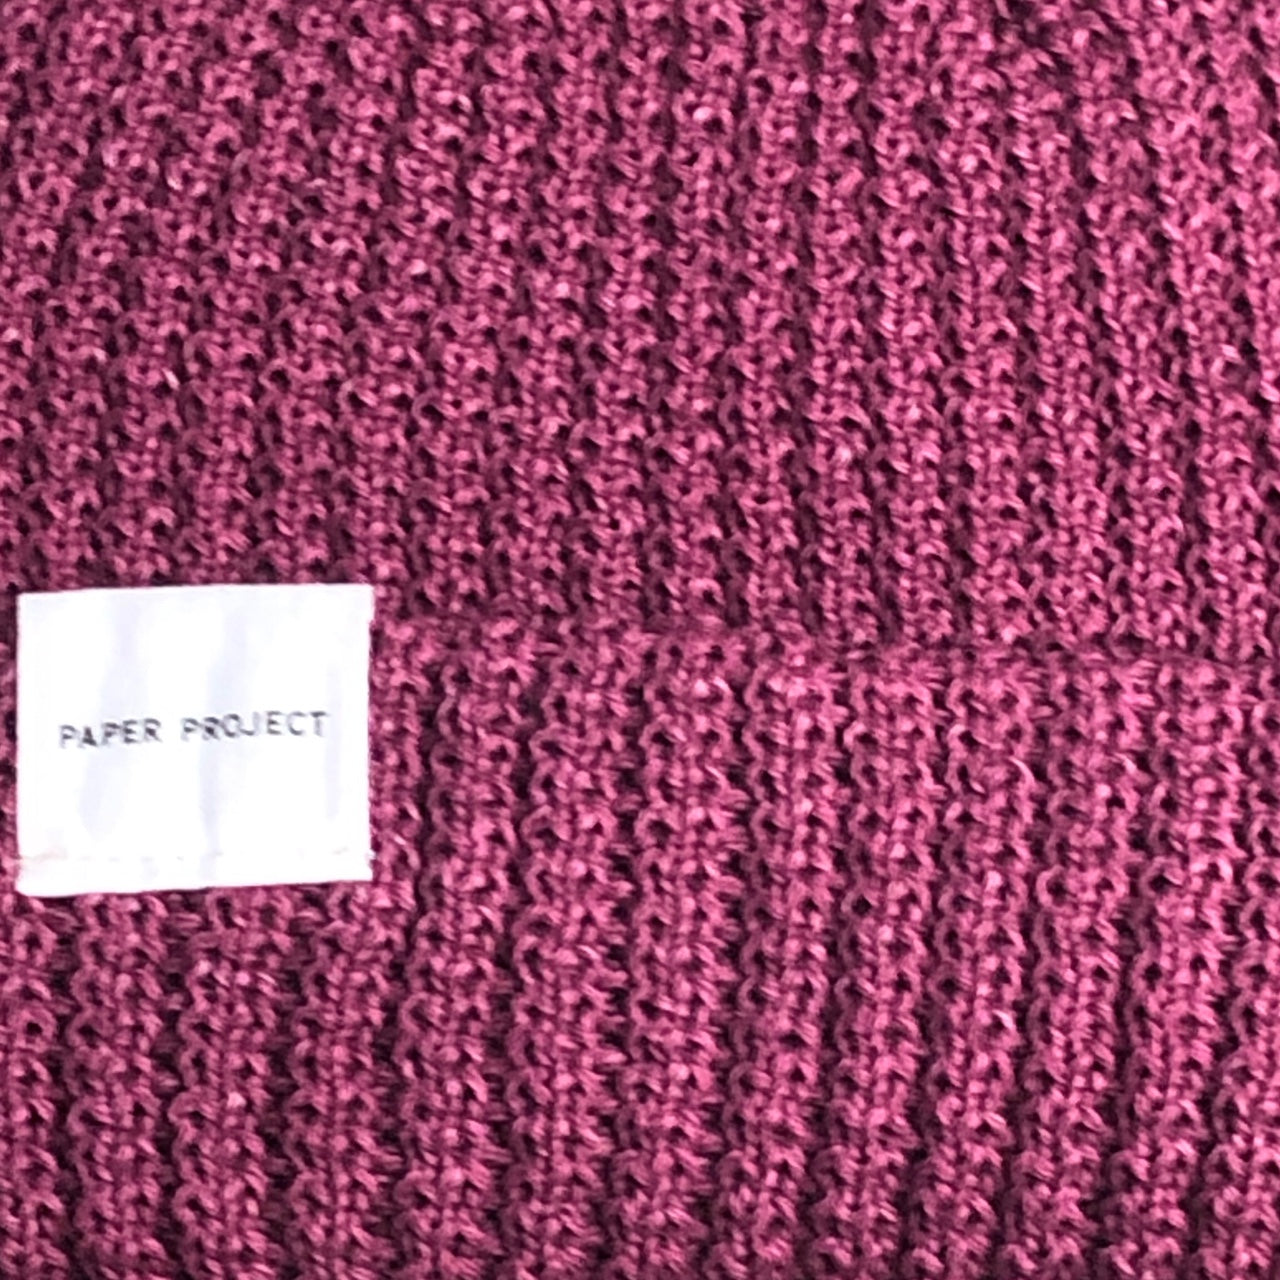 Paper Project - Plum Waffle Beanie